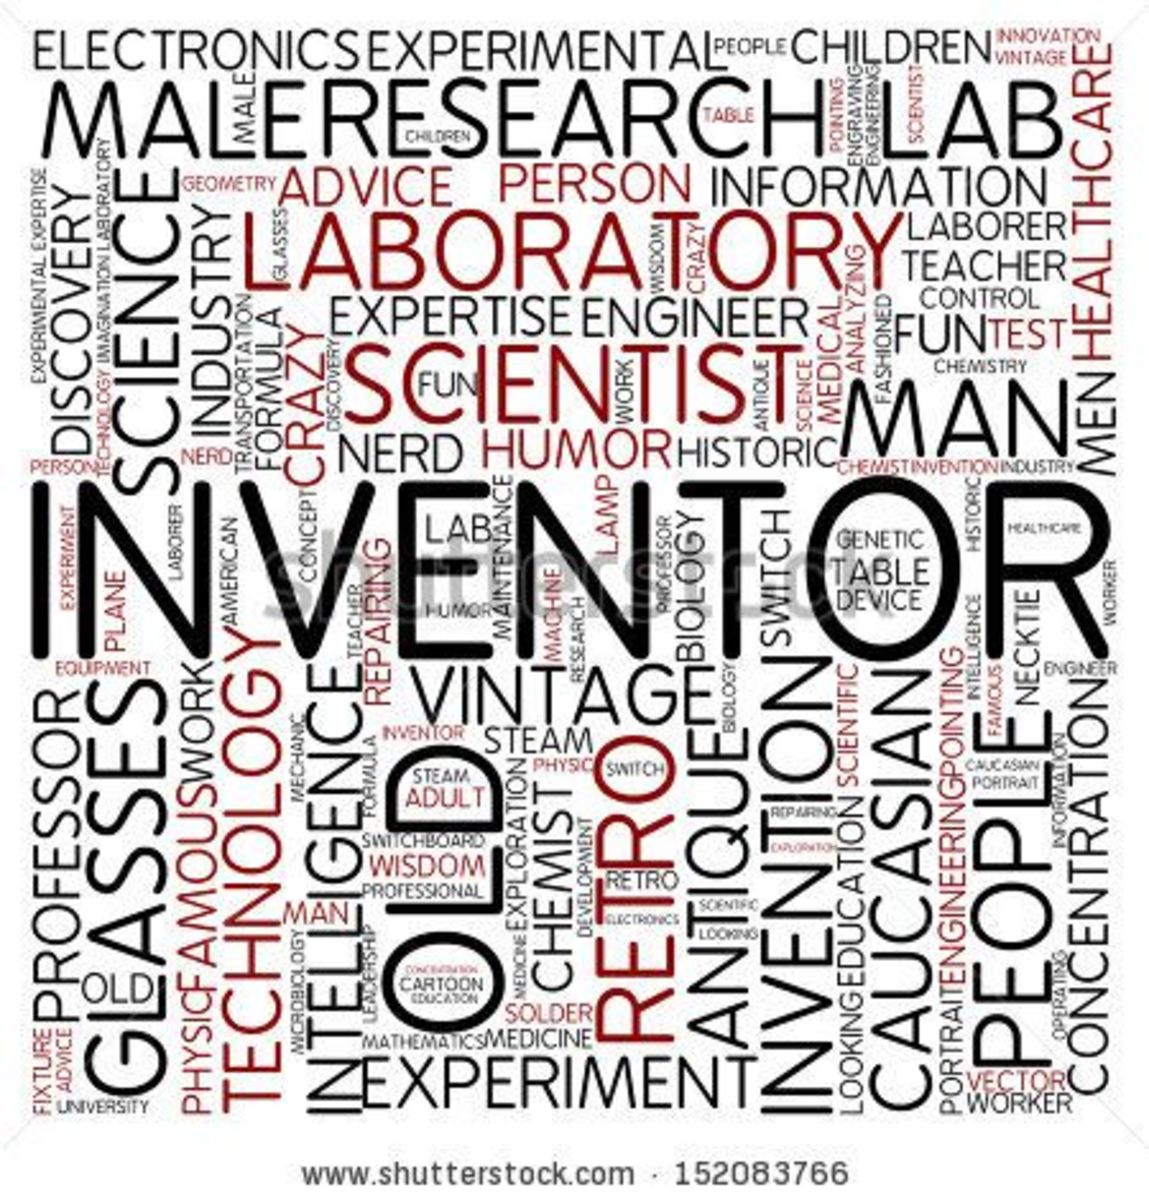 best-african-americans-inventors-and-scientist